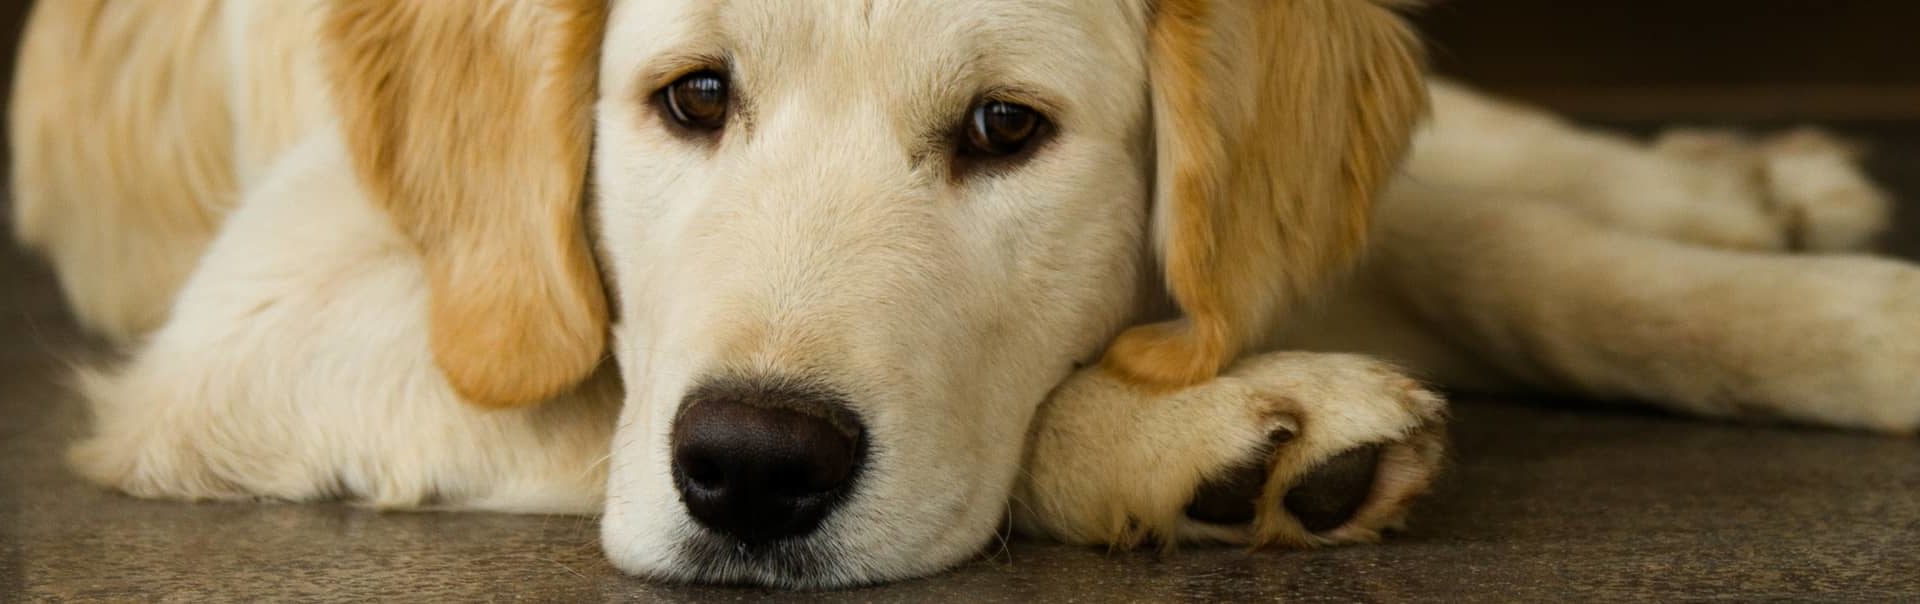 Golden dog resting head on the floor looking at camera